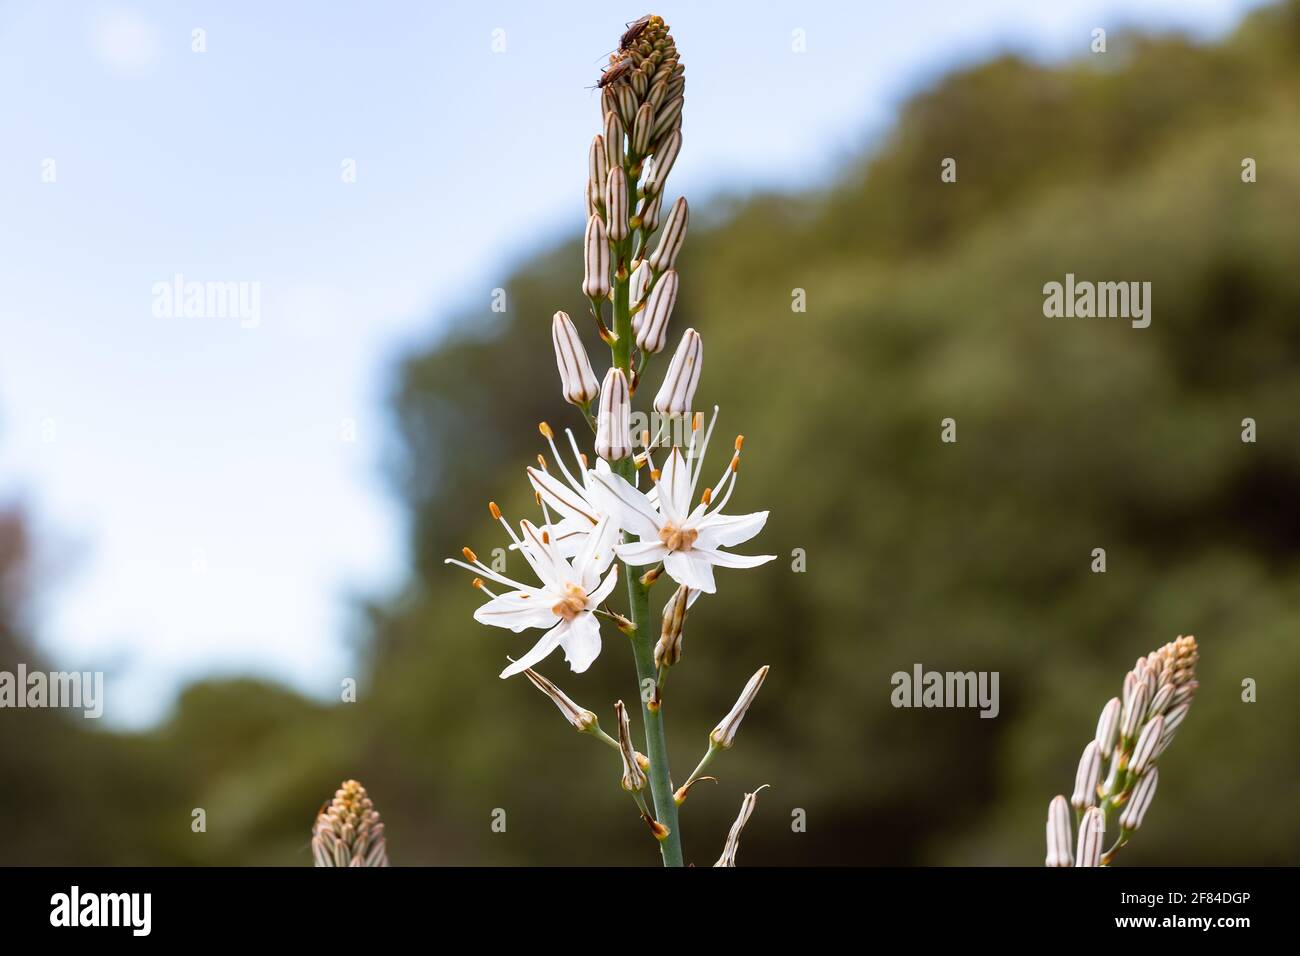 Asphodelus L., Sp. is a genus of mainly perennial flowering plants in the asphodel family Asphodelaceae. The genus was formerly included in the lily f Stock Photo